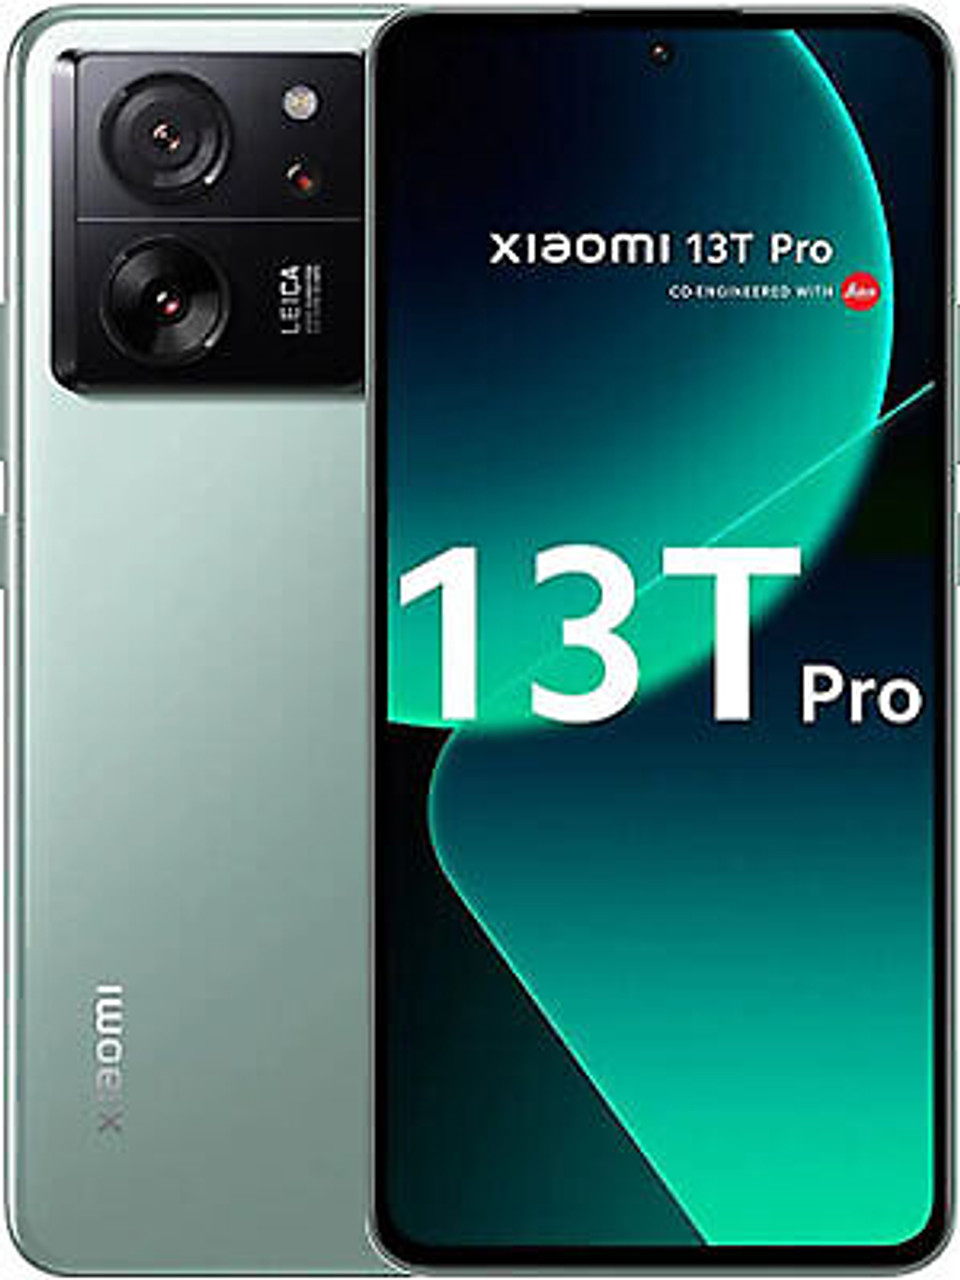 Xiaomi 13T Pro 5G 1TB ROM 16GB RAM Factory Unlocked (GSM Only | No CDMA -  not Compatible with Verizon/Sprint) Global Mobile Cell Phone - Black